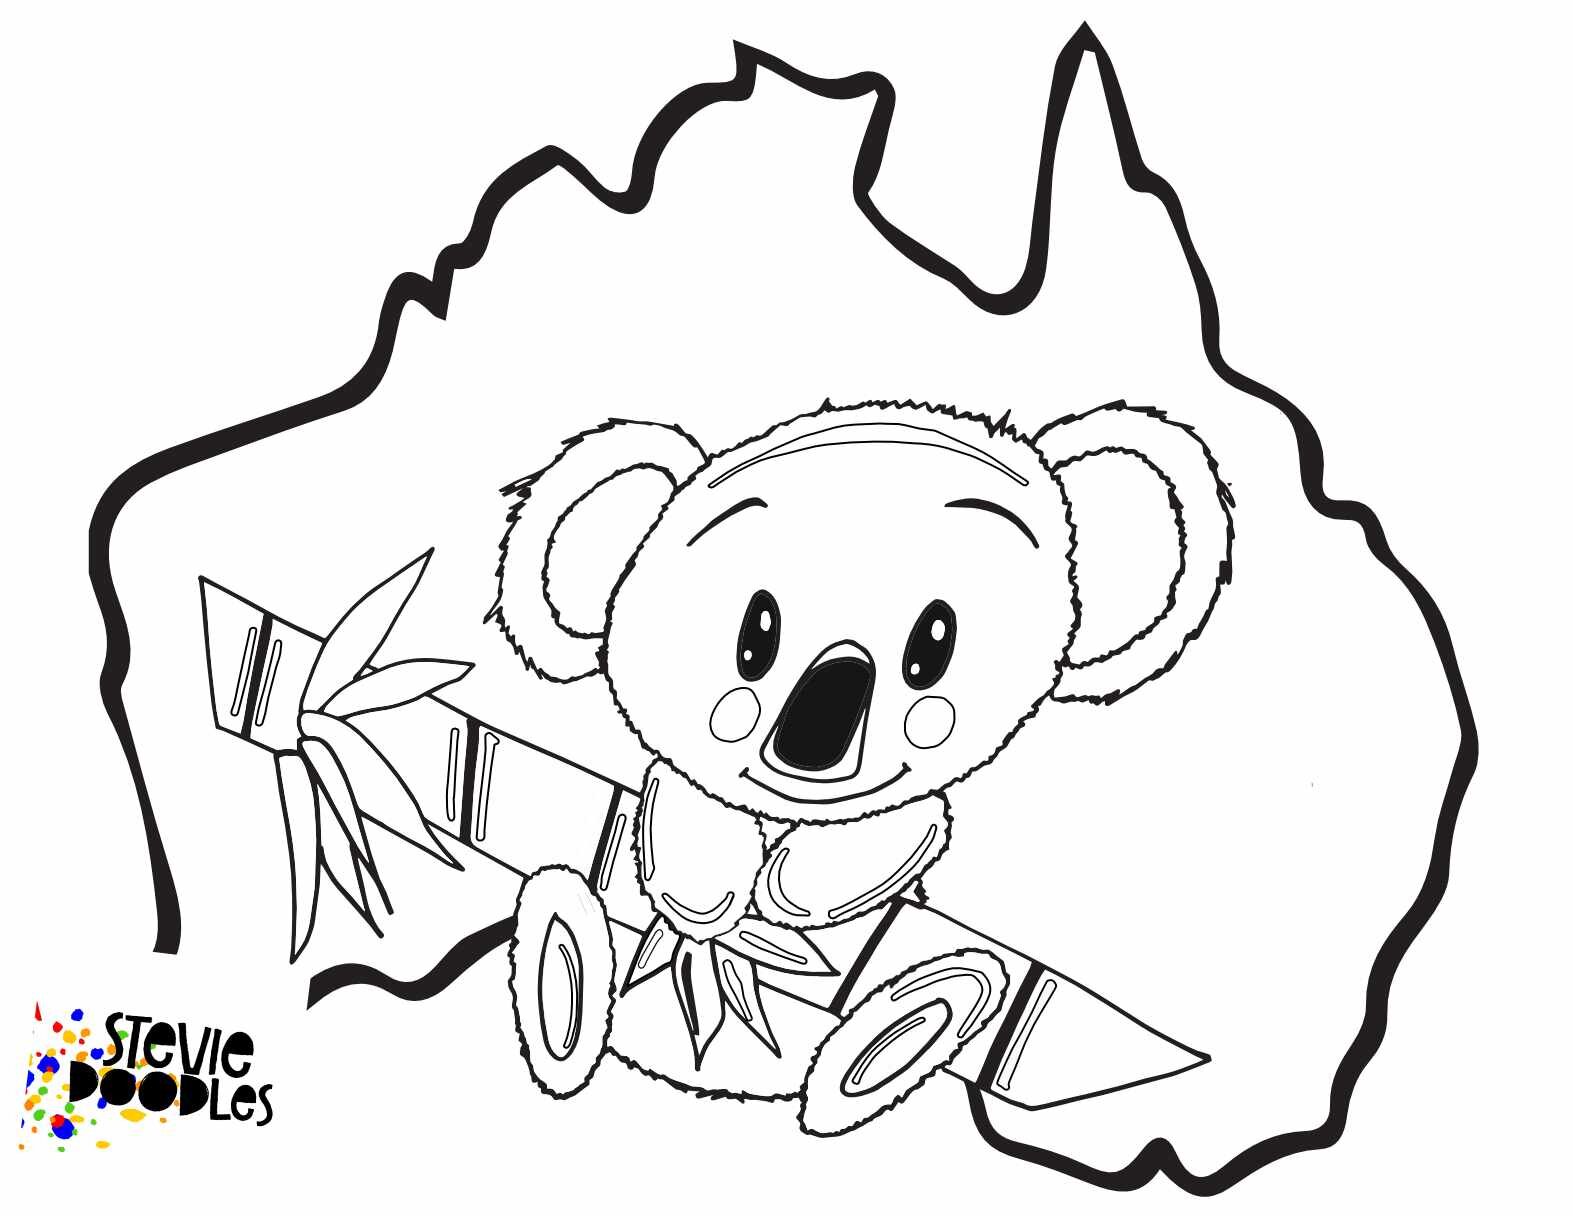 Free Little Koala With Australia Coloring Page CLICK HERE TO DOWNLOAD THE PAGE ABOVE